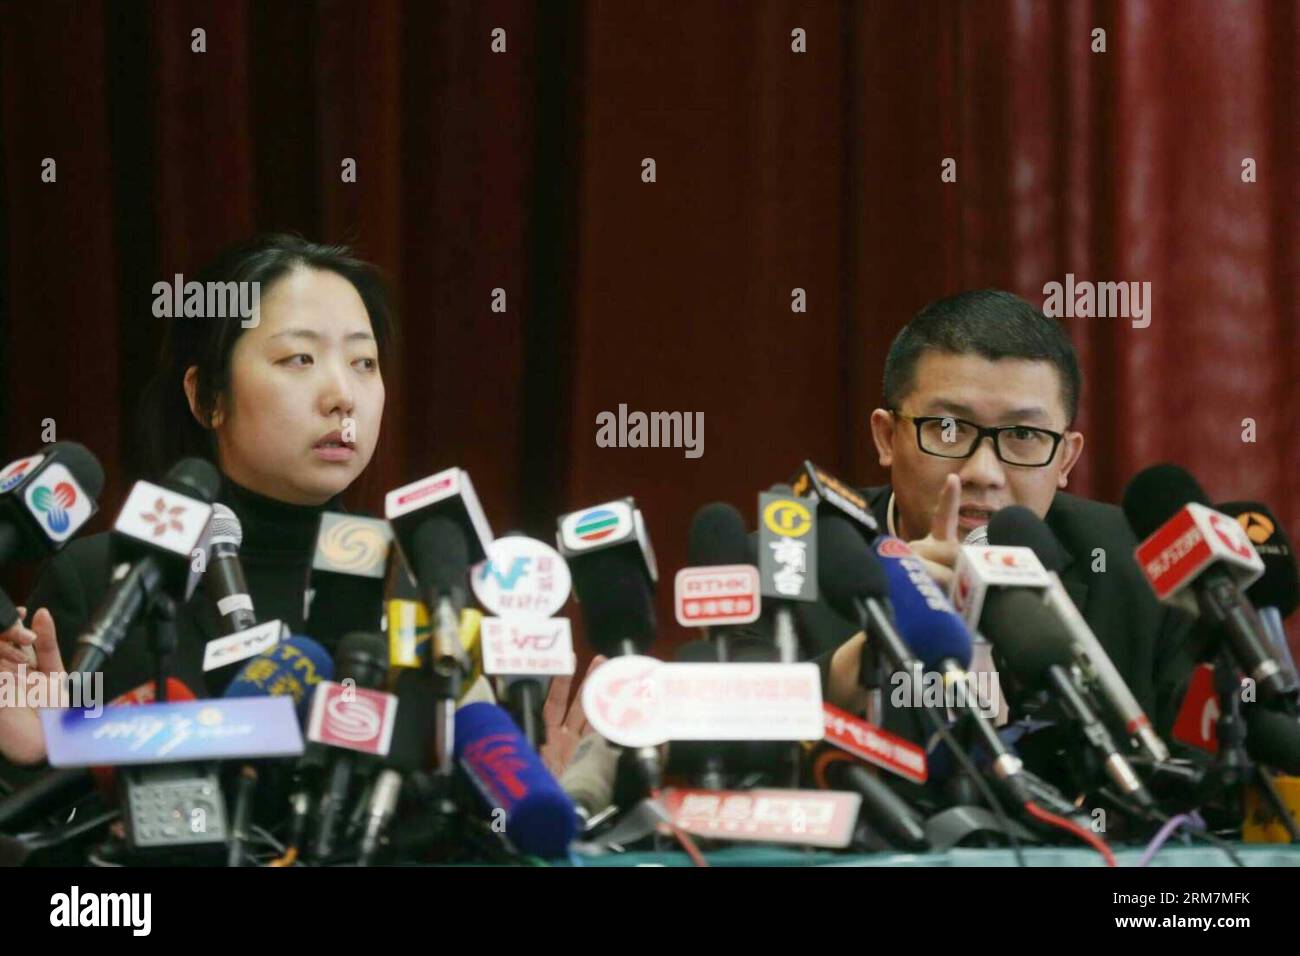 Ignatius Ong Ming Choy, senior official of Malaysian Airlines, answers questions at the third press conference concerning the missing flight MH370 in Beijing, capital of China, March 9, 2014. The Malaysia Airlines Flight MH370, a Boeing B777-200, lost communication and radar signal on its flight from Malaysia s capital Kuala Lumpur to Beijing on early Saturday morning. On board were 227 passengers from 14 countries, including 154 Chinese, and 12 Malaysian flight crew. (Xinhua/Wang Shen) CHINA-BEIJING-MALAYSIAN FLIGHT-MISSING-PRESS CONFERENCE (CN) PUBLICATIONxNOTxINxCHN   Ignatius Ong Ming Choy Stock Photo